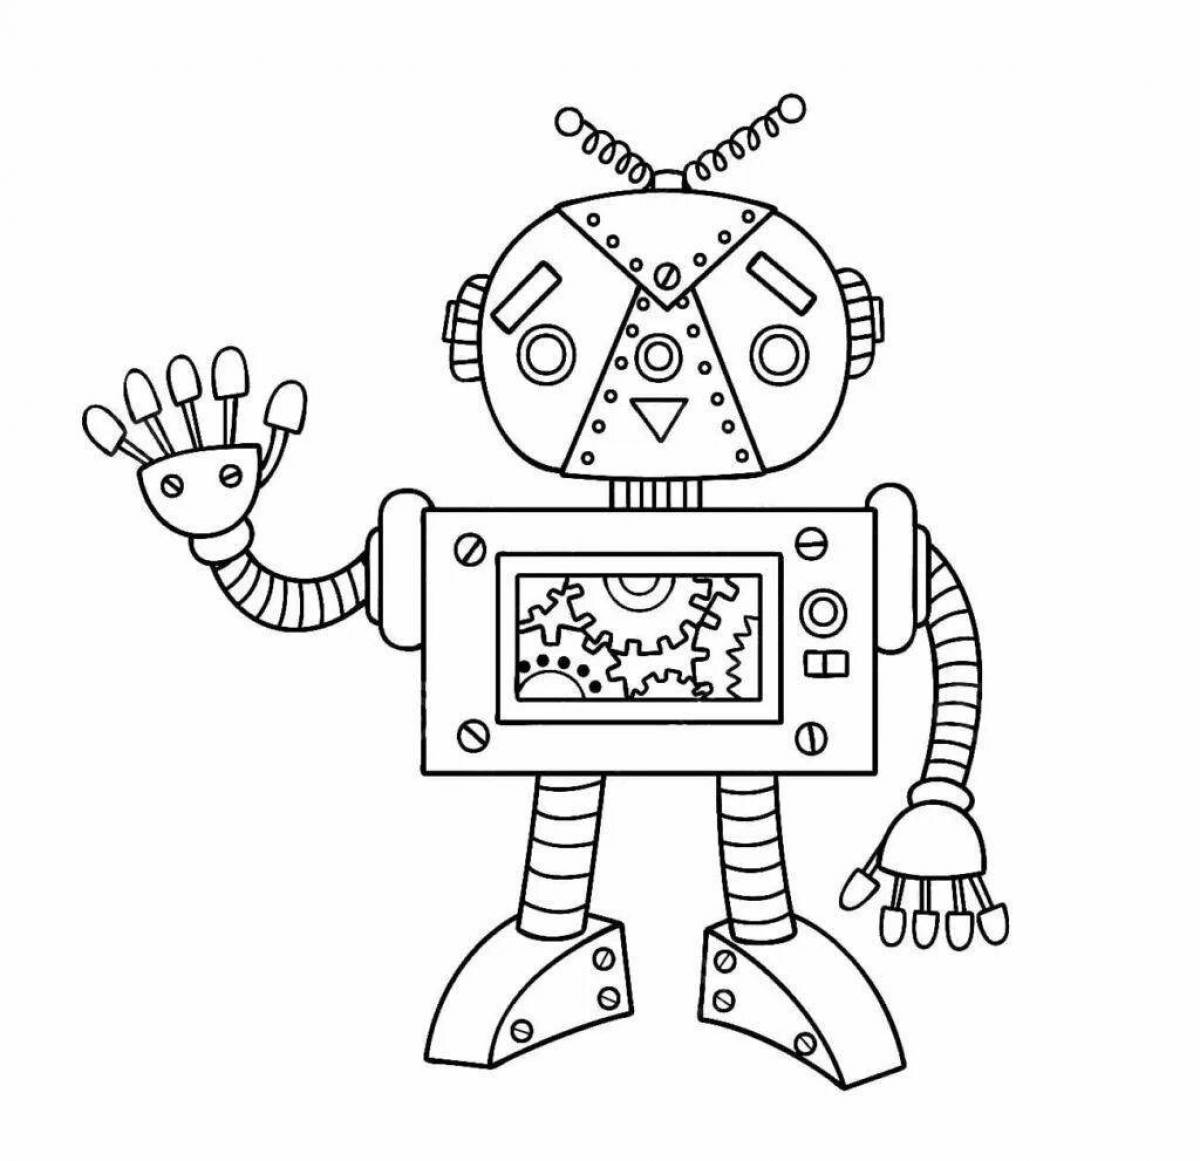 Attractive robot teacher coloring page